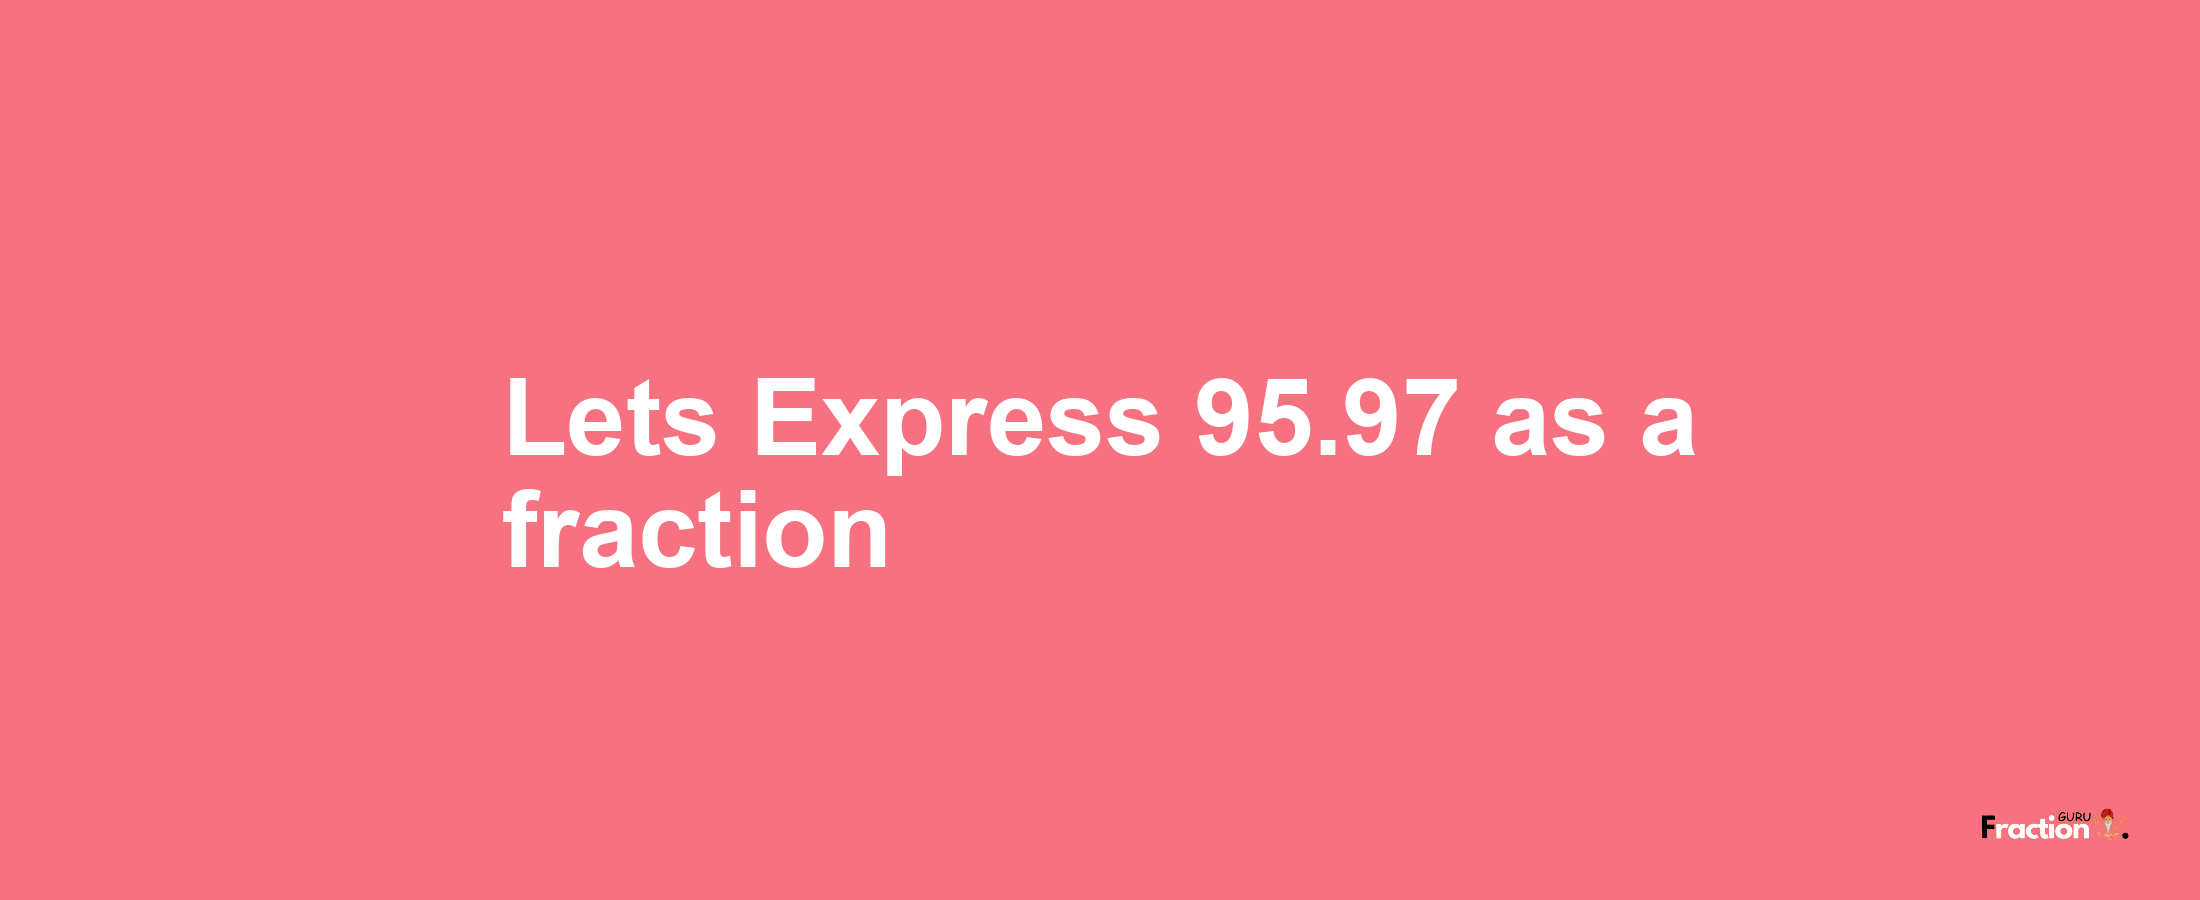 Lets Express 95.97 as afraction